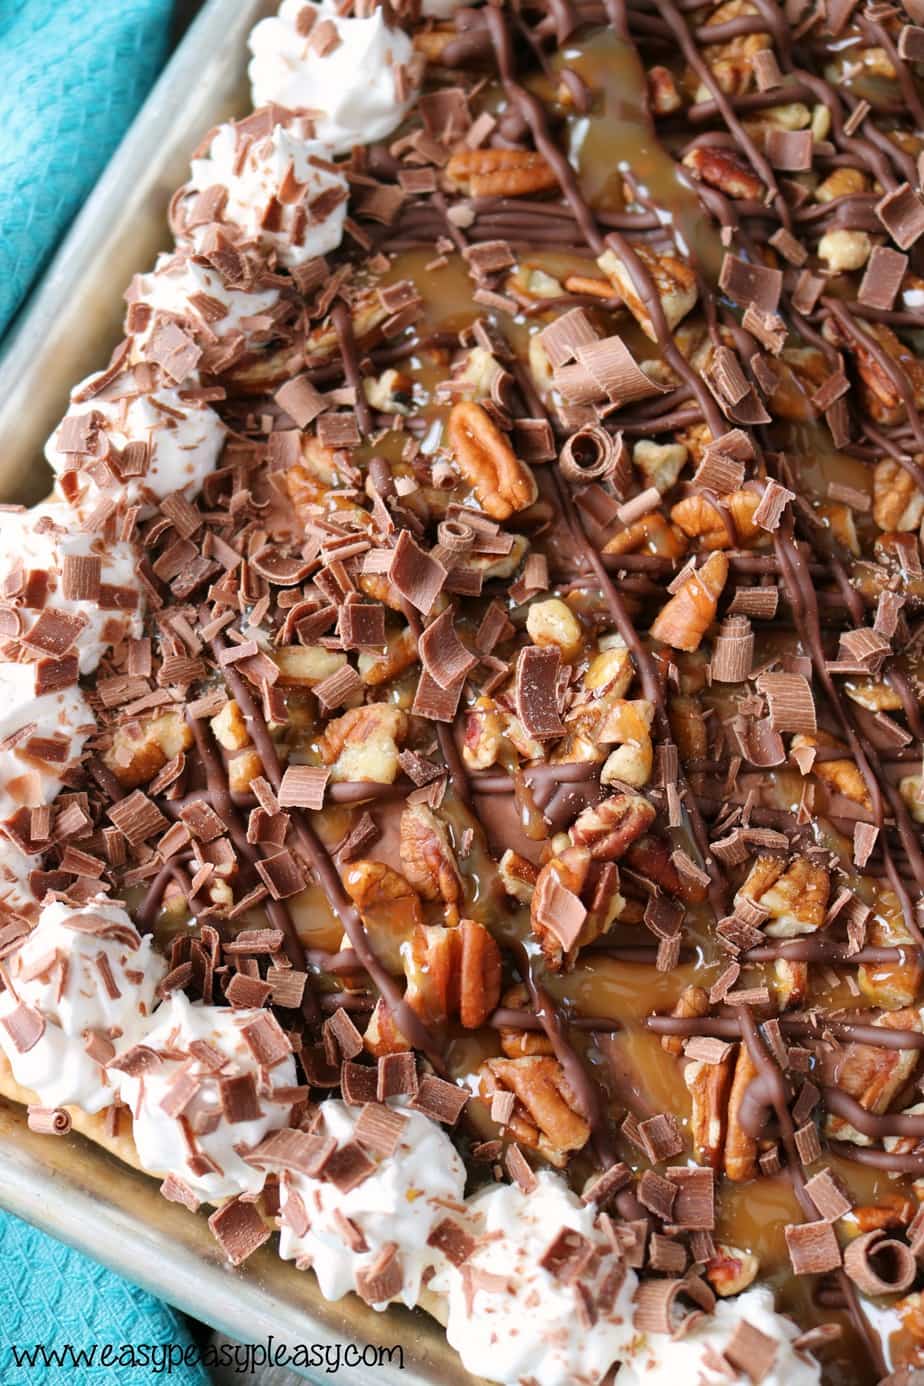 Feed a crowd with this easy but decadent Chocolate Turtle Slab Pie Recipe